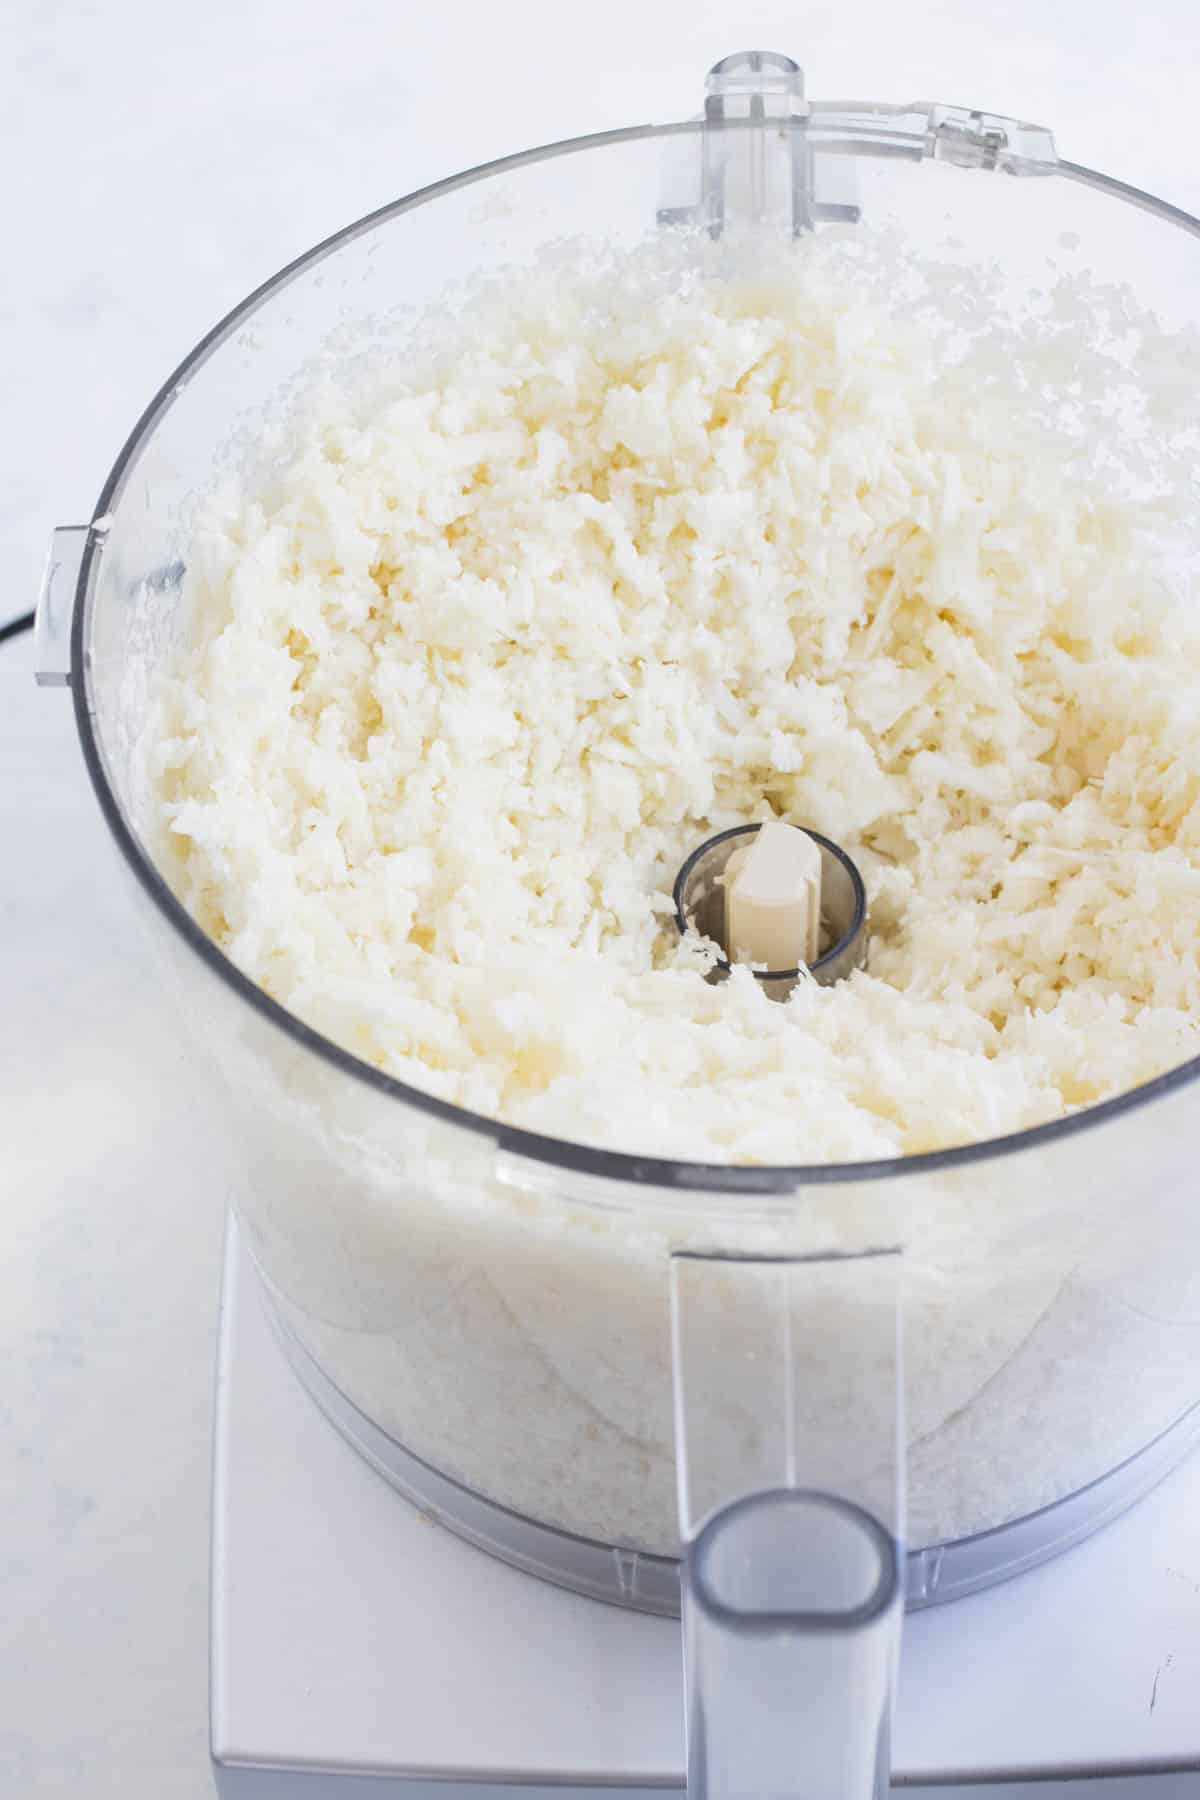 A food processor is full of grated cauliflower.